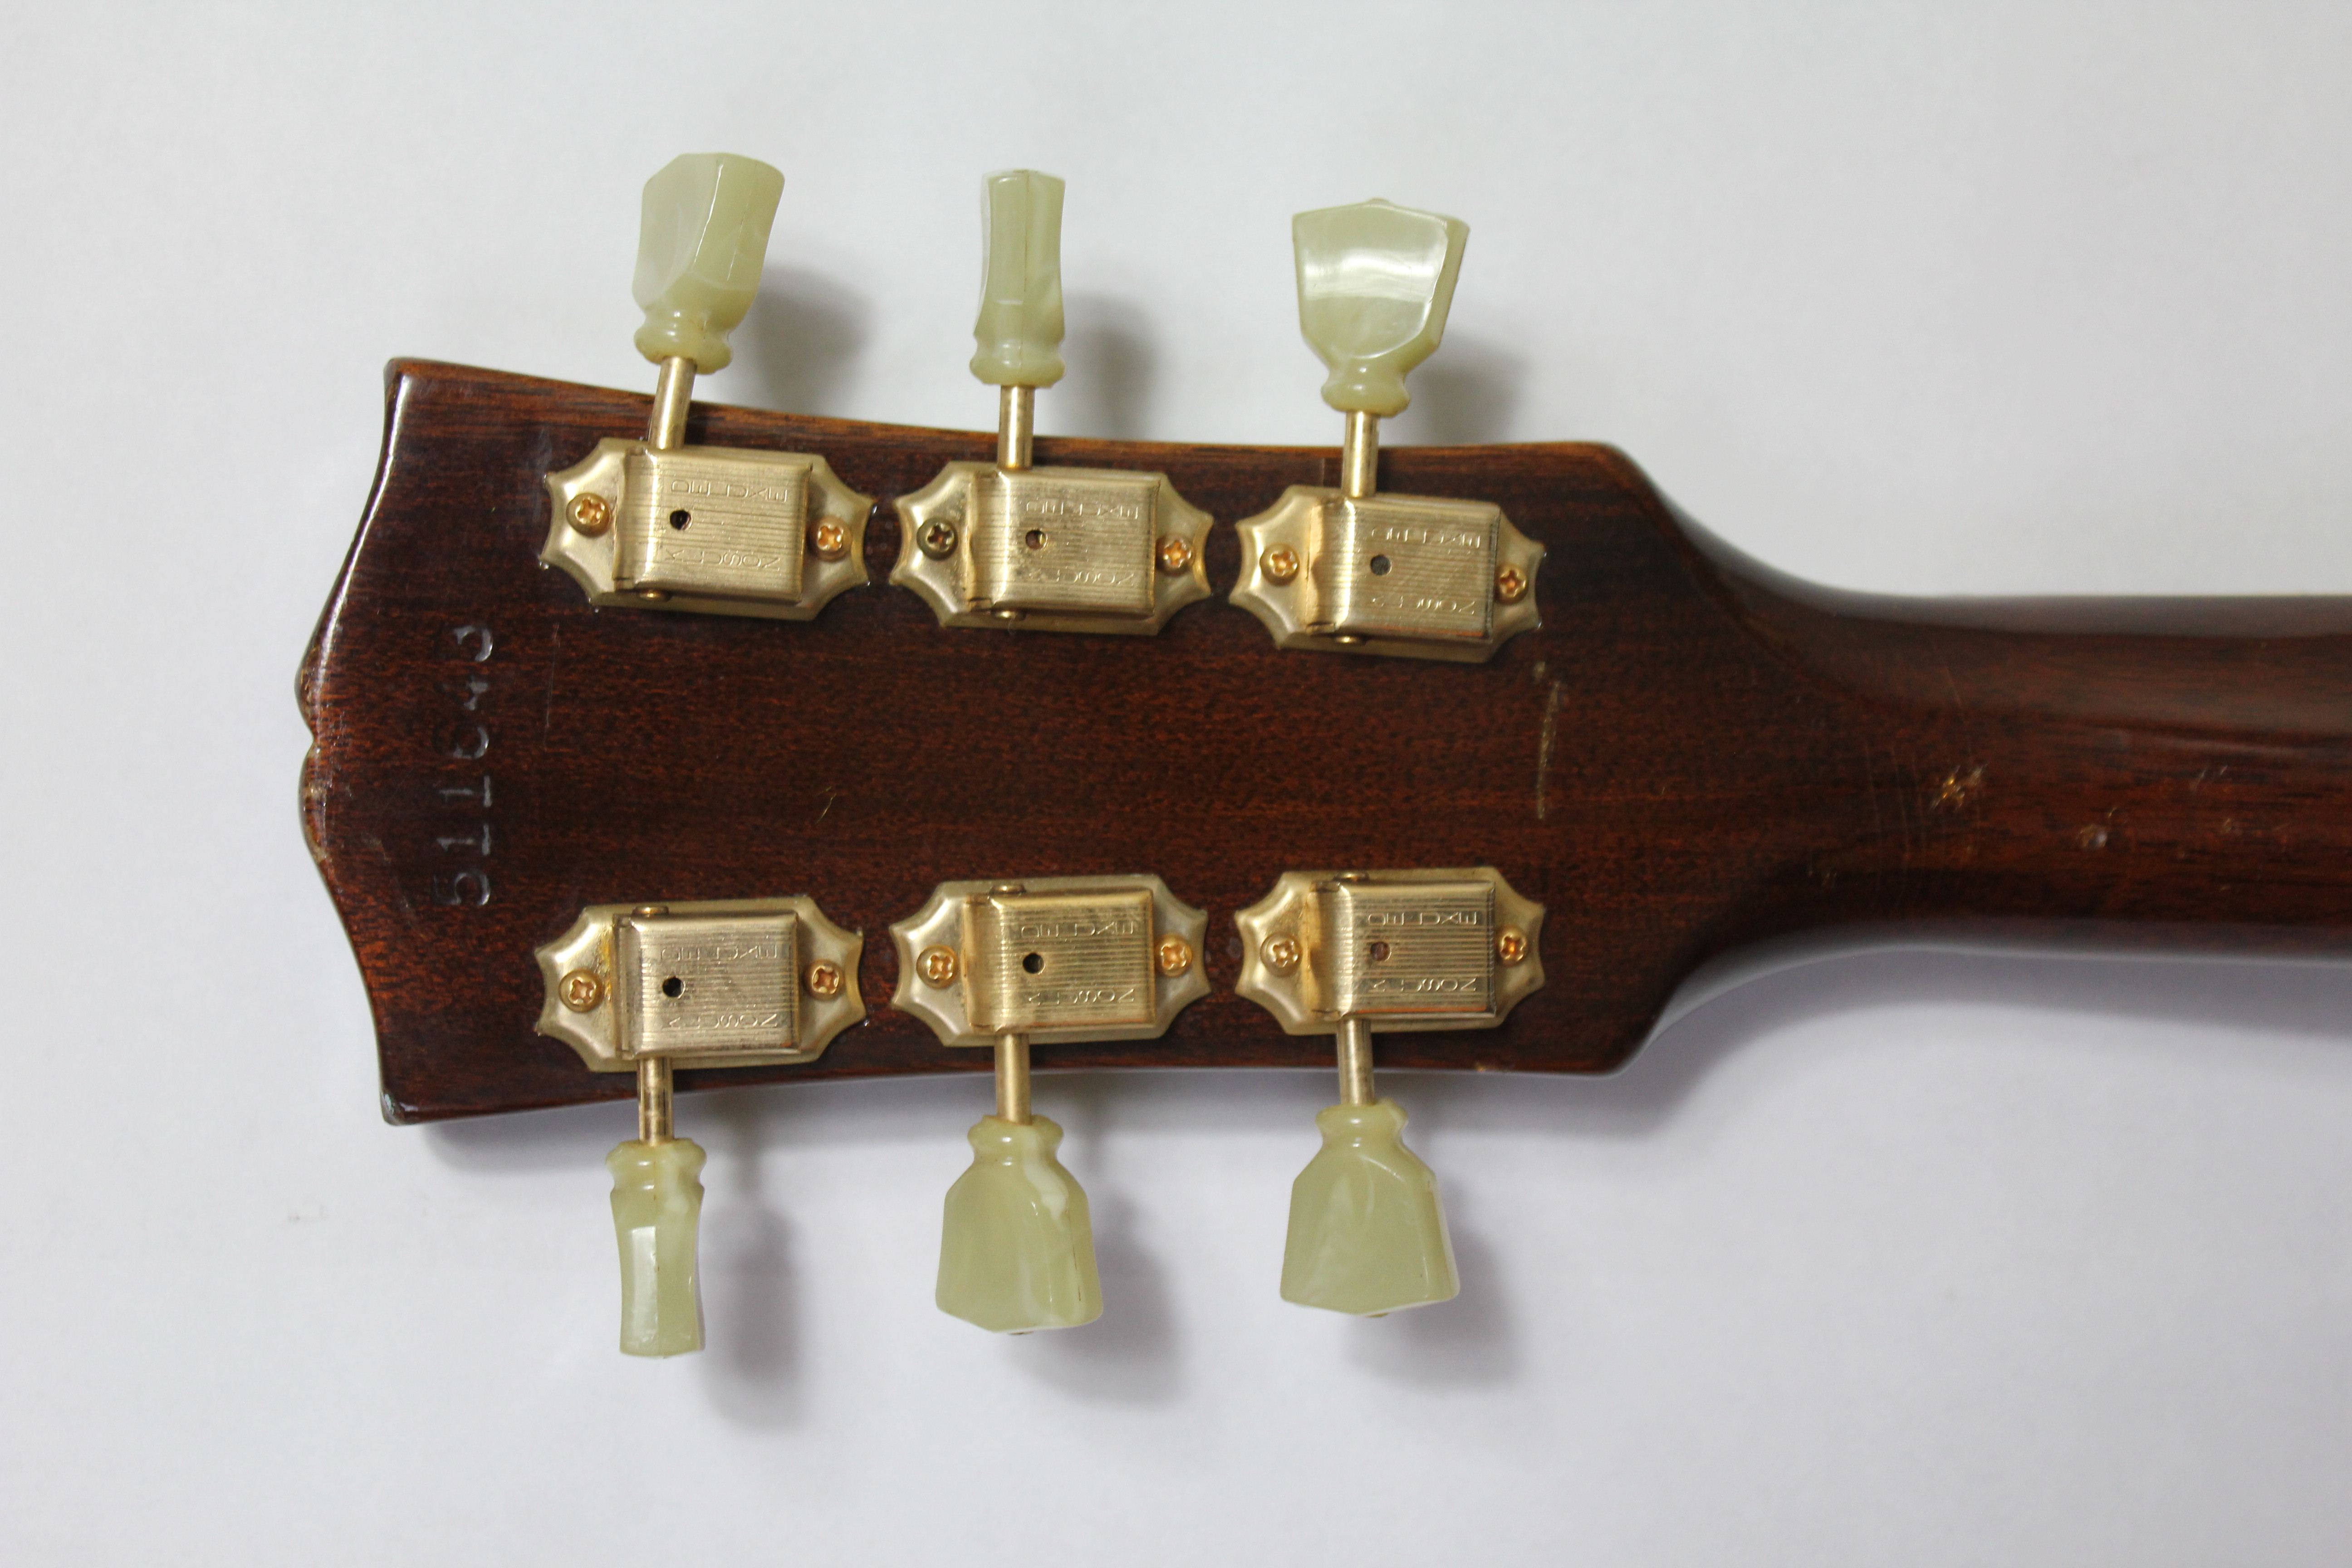 GIBSON, A VERY RARE ES 345 STEREO GUITAR, CIRCA 1965 (Minimum play), complete with hang tags, - Image 7 of 28